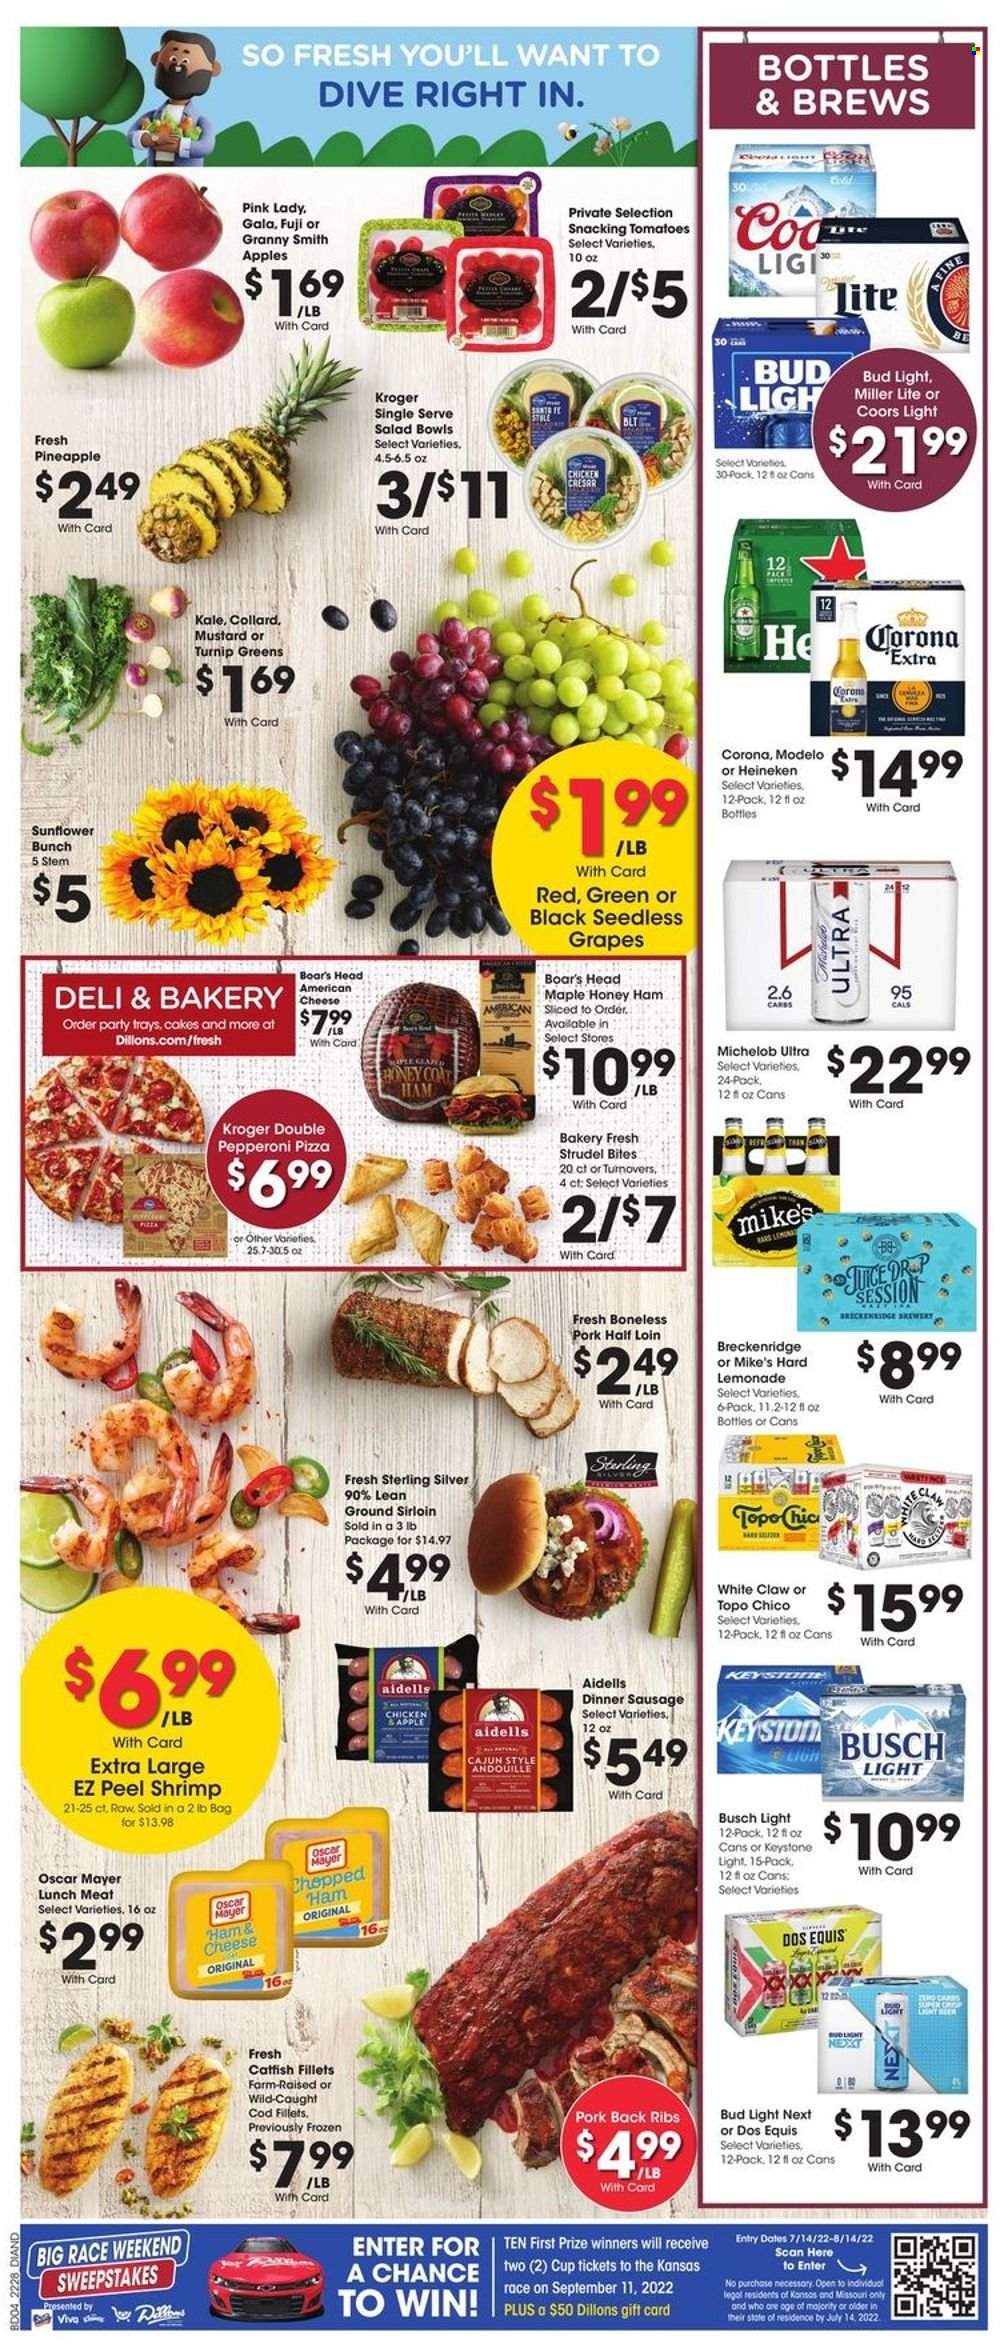 thumbnail - Dillons Flyer - 08/10/2022 - 08/16/2022 - Sales products - cake, strudel, Ace, turnovers, kale, apples, Gala, grapes, seedless grapes, pineapple, Granny Smith, Pink Lady, catfish, cod, shrimps, pizza, ham, Oscar Mayer, sausage, pepperoni, lunch meat, american cheese, mustard, lemonade, juice, White Claw, beer, Busch, Bud Light, Corona Extra, Heineken, Keystone, Modelo, pork meat, pork ribs, pork back ribs, cup, salad bowl, sunflower, Miller Lite, Coors, Dos Equis, Michelob. Page 3.